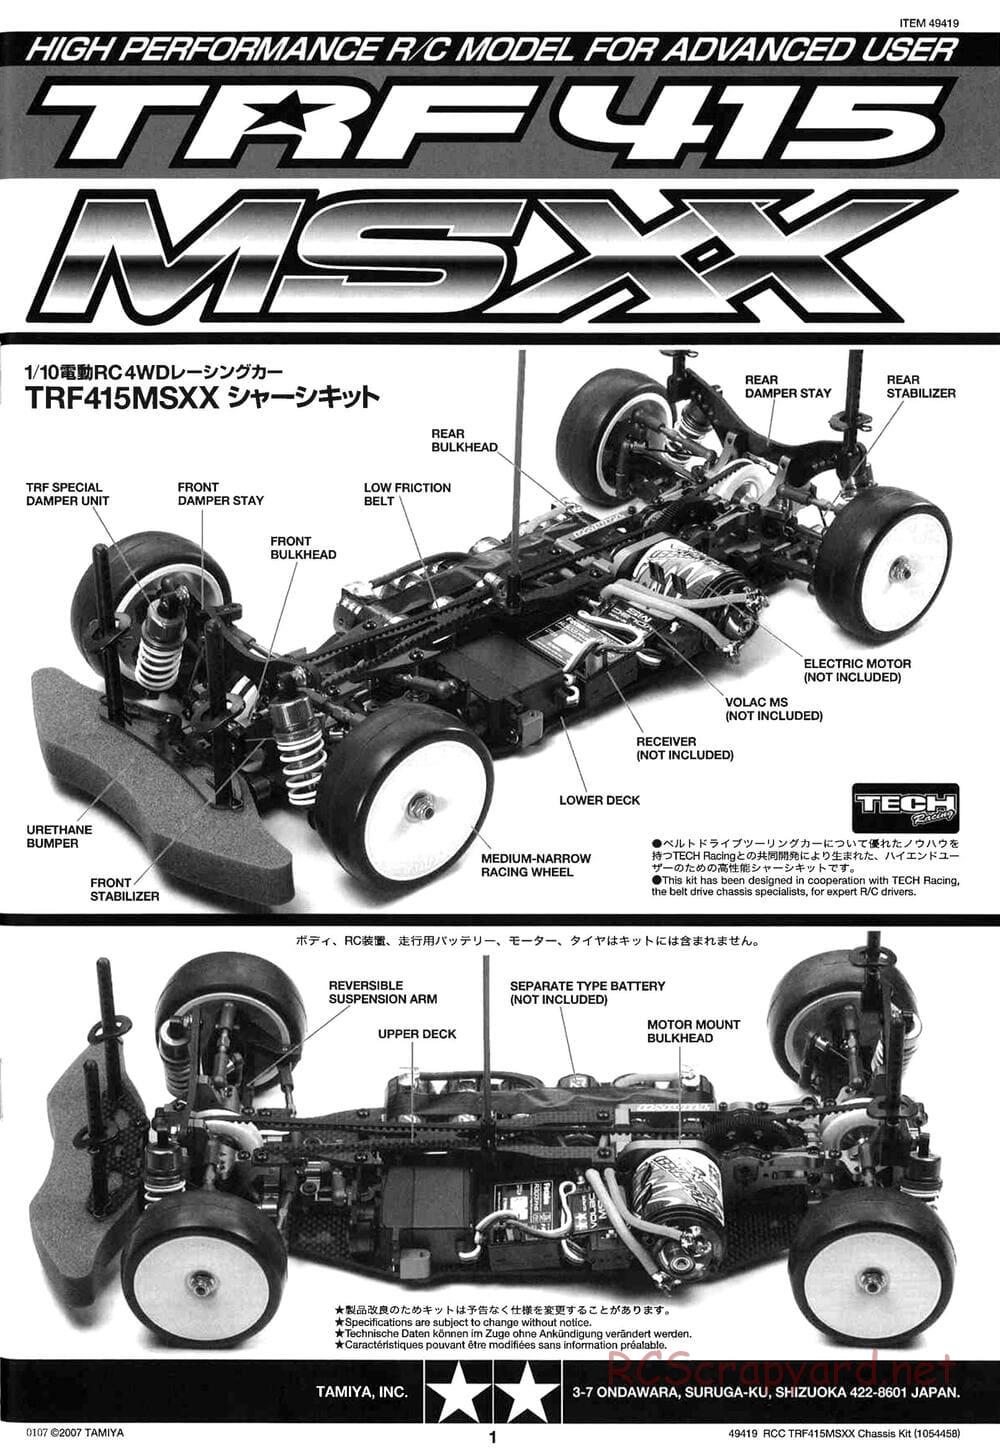 Tamiya - TRF415-MSXX Chassis - Manual - Page 1